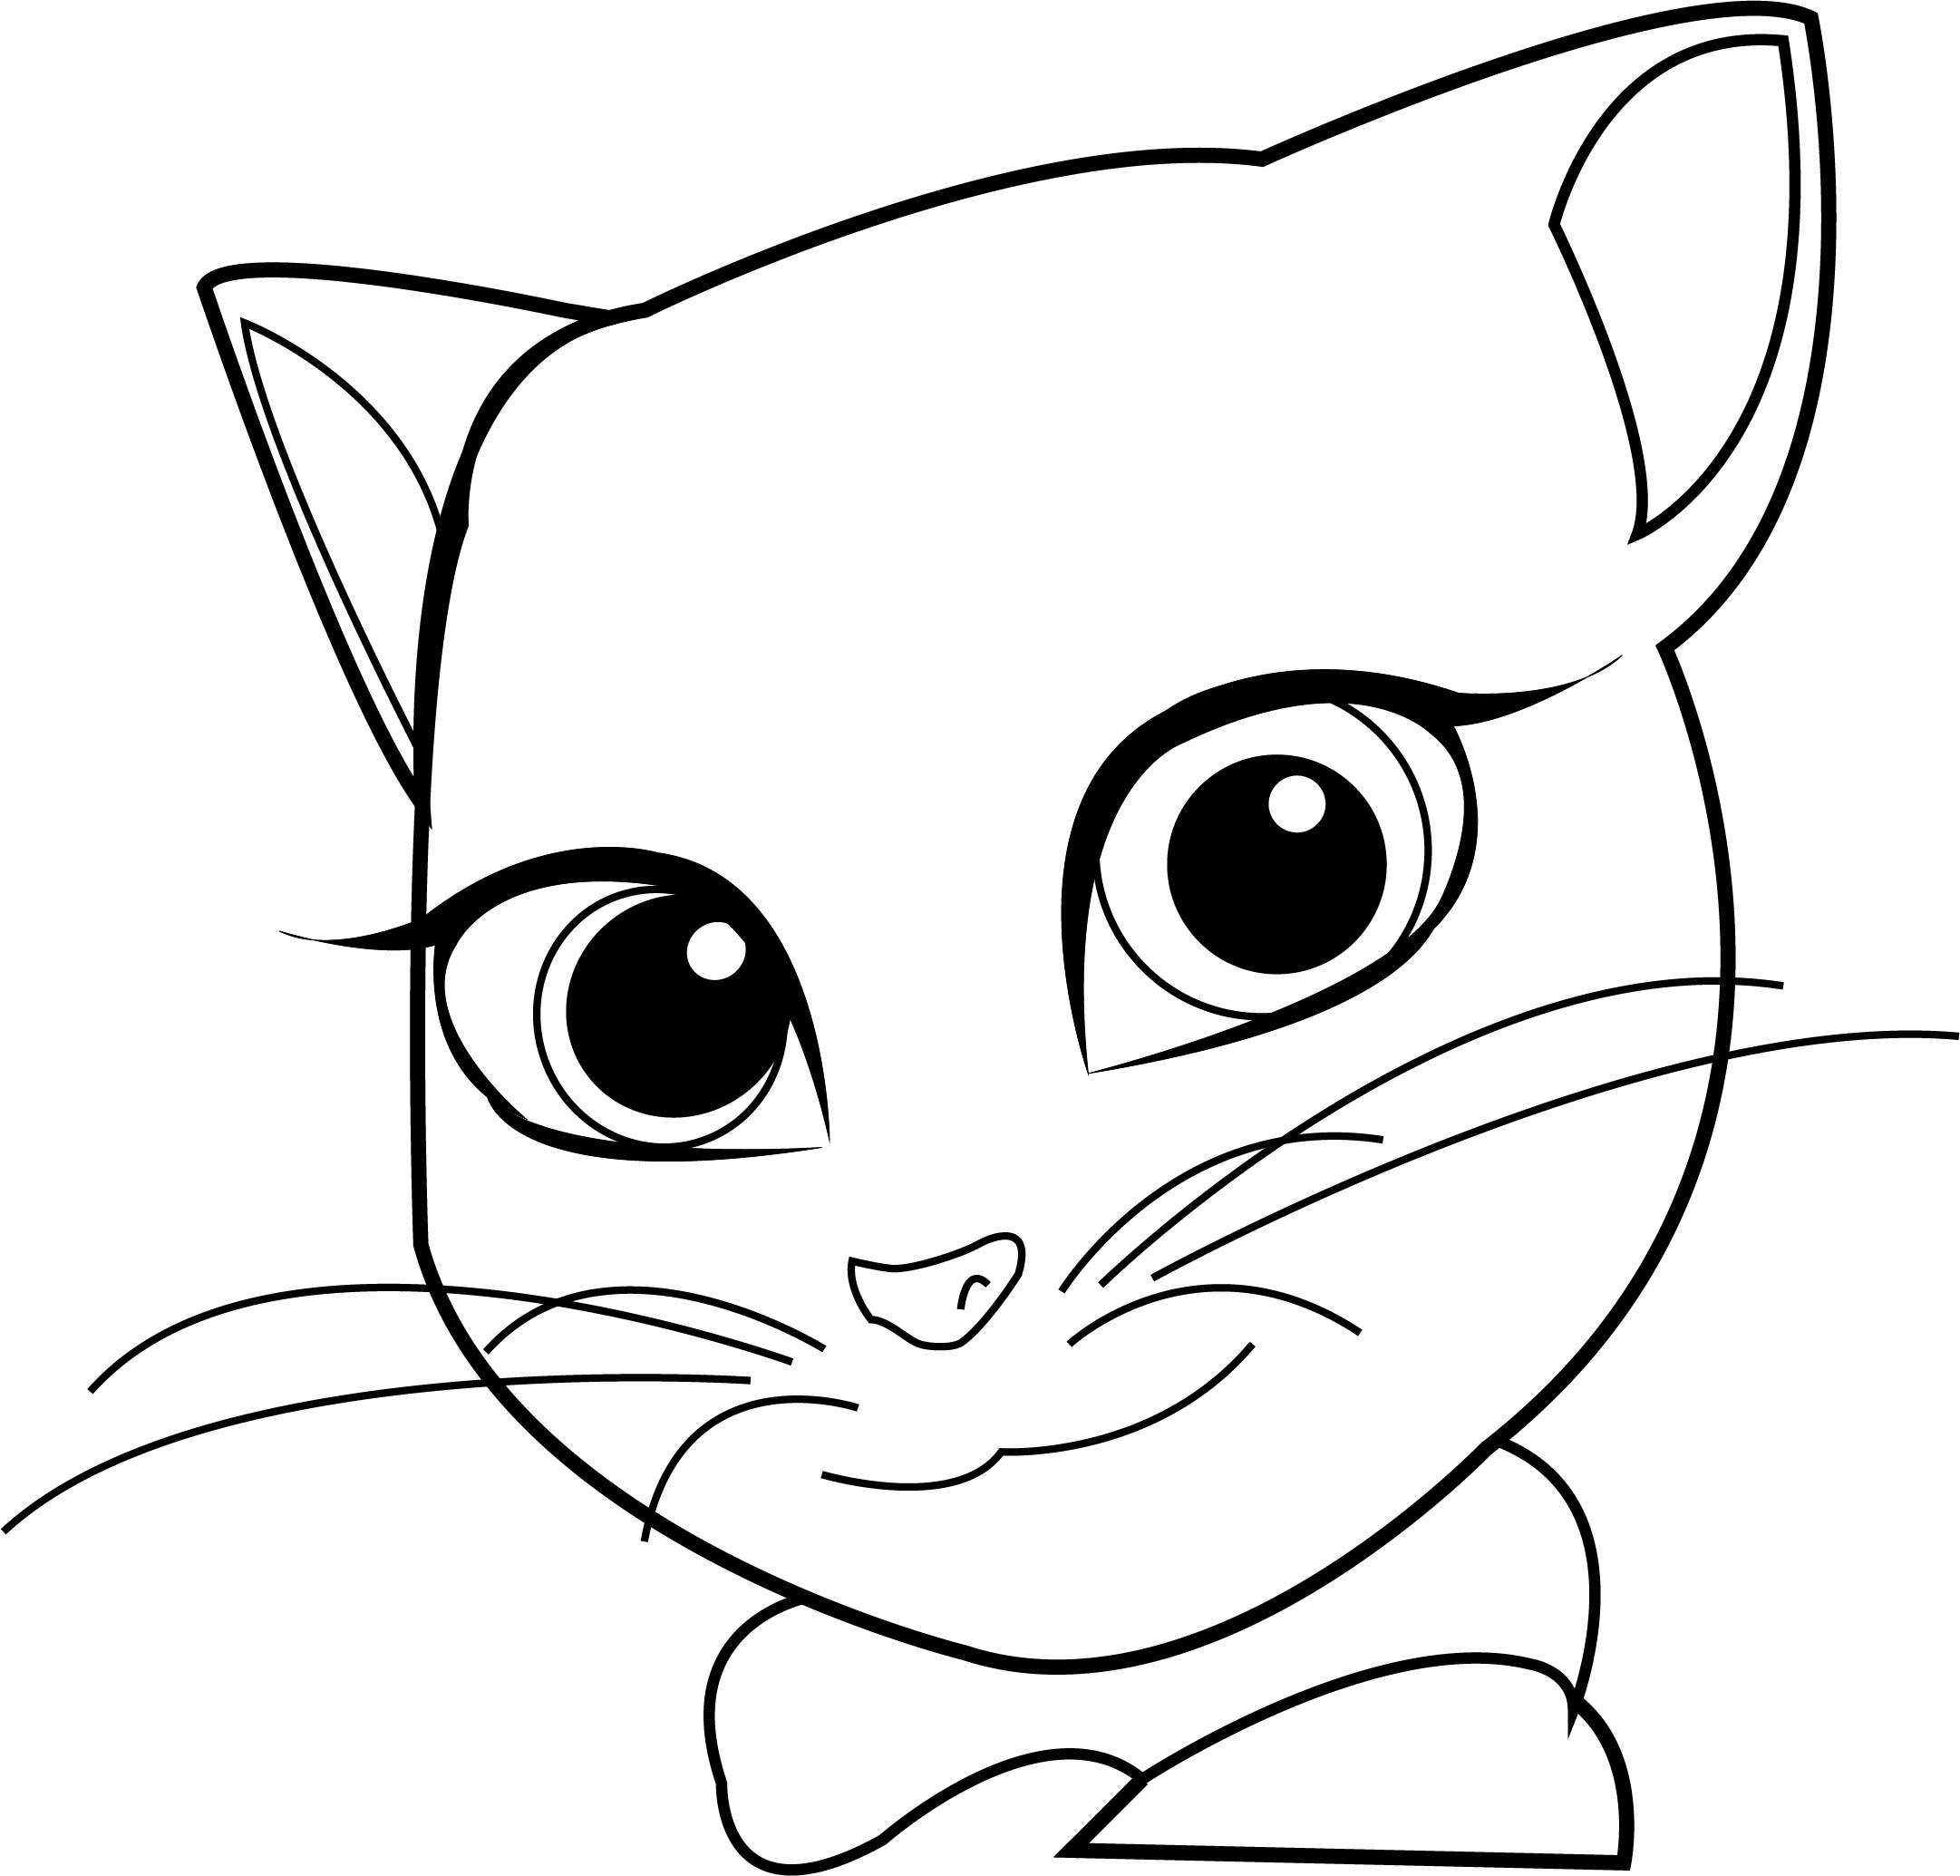 Girl Talking Cat Coloring Page - Free Printable Coloring Pages for Kids